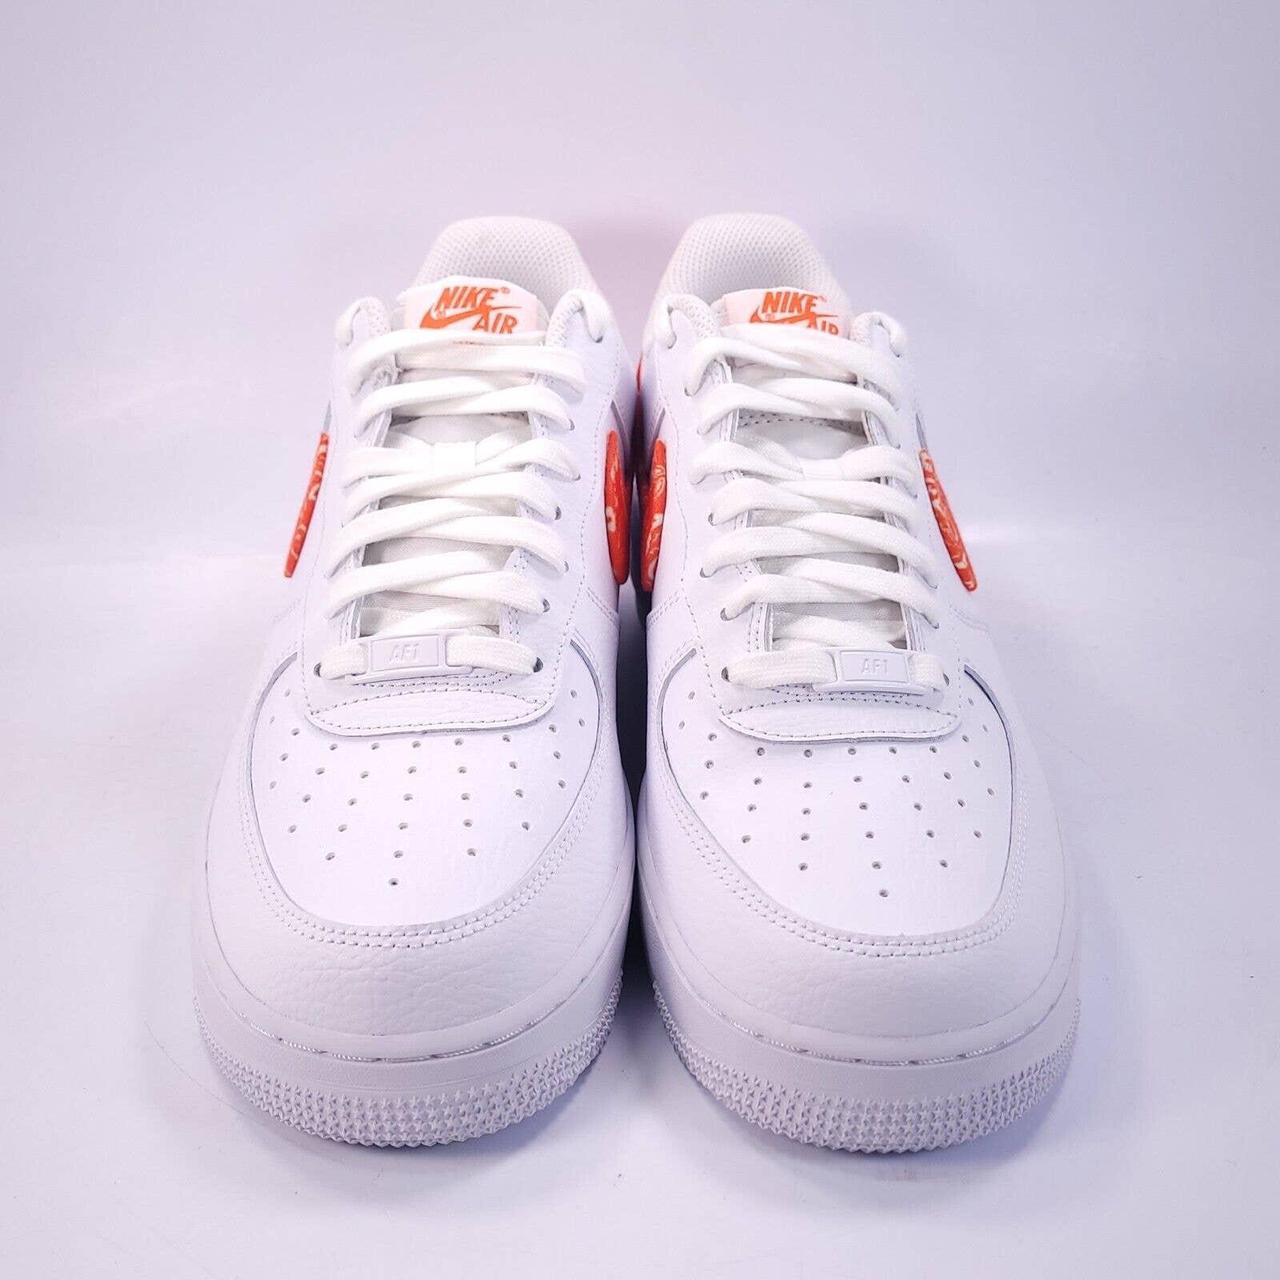 Nike Air Force 1 '07 ESS sneakers in white and orange